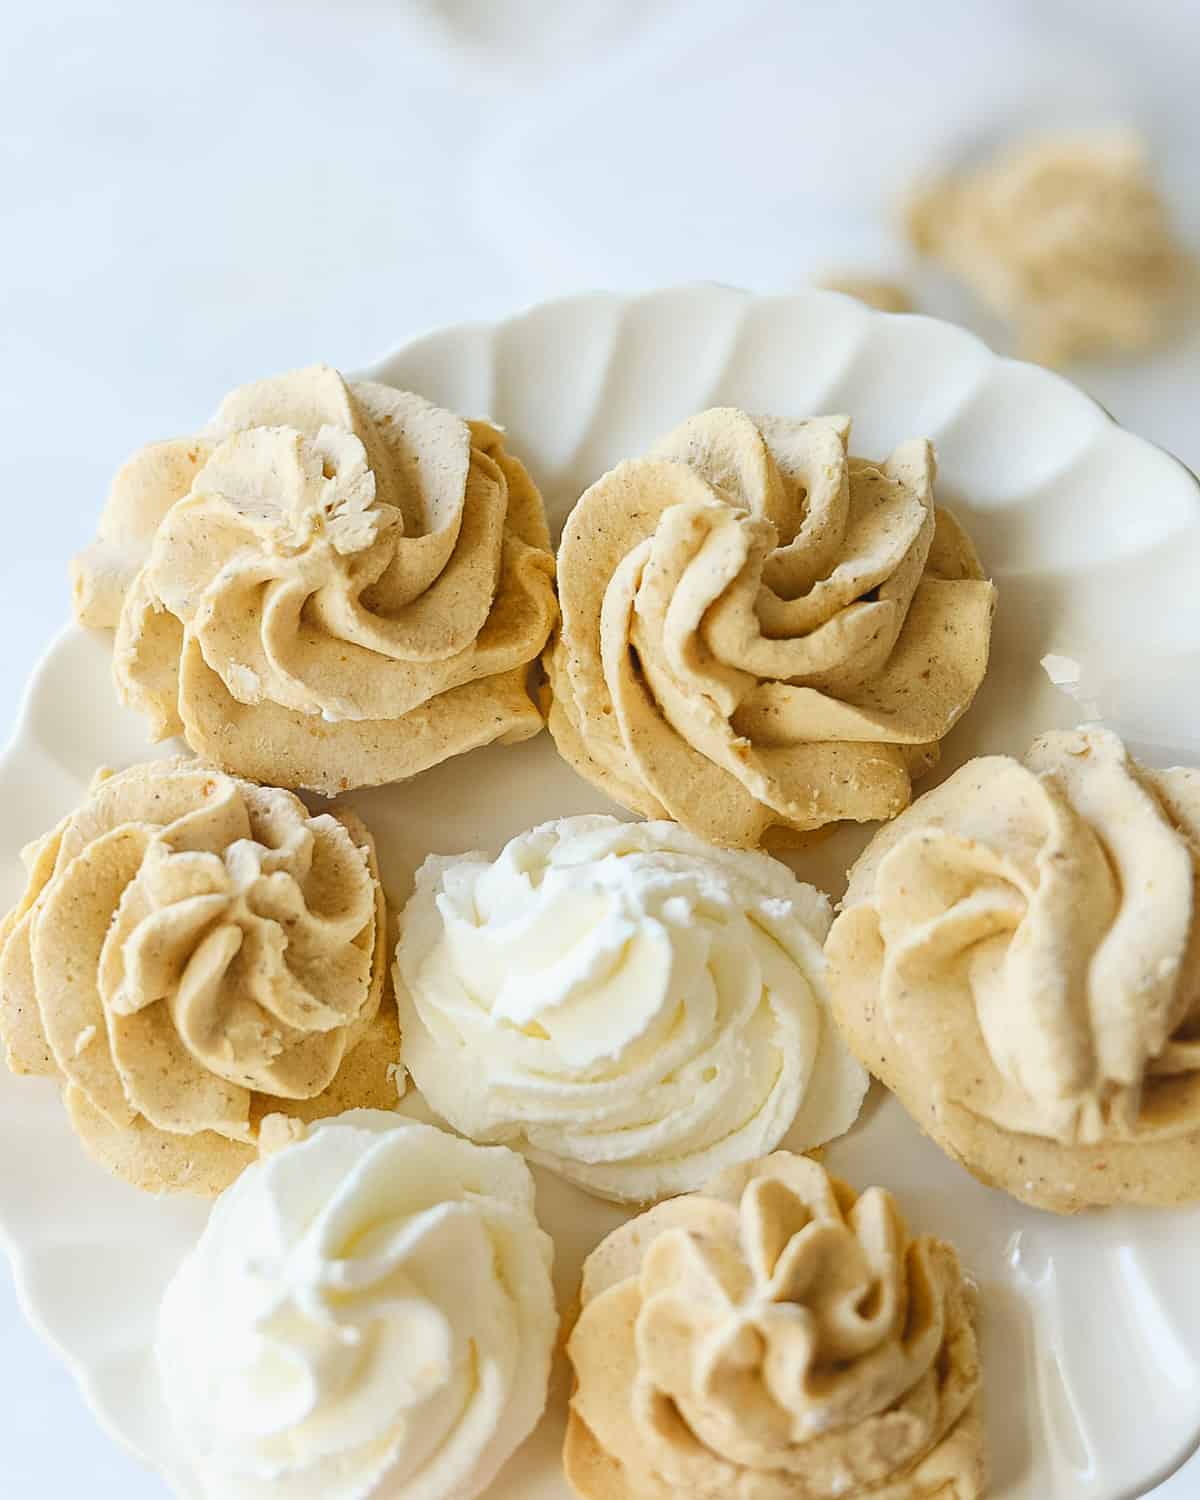 Rosettes of pumpkin and plain whipped cream on a plate.